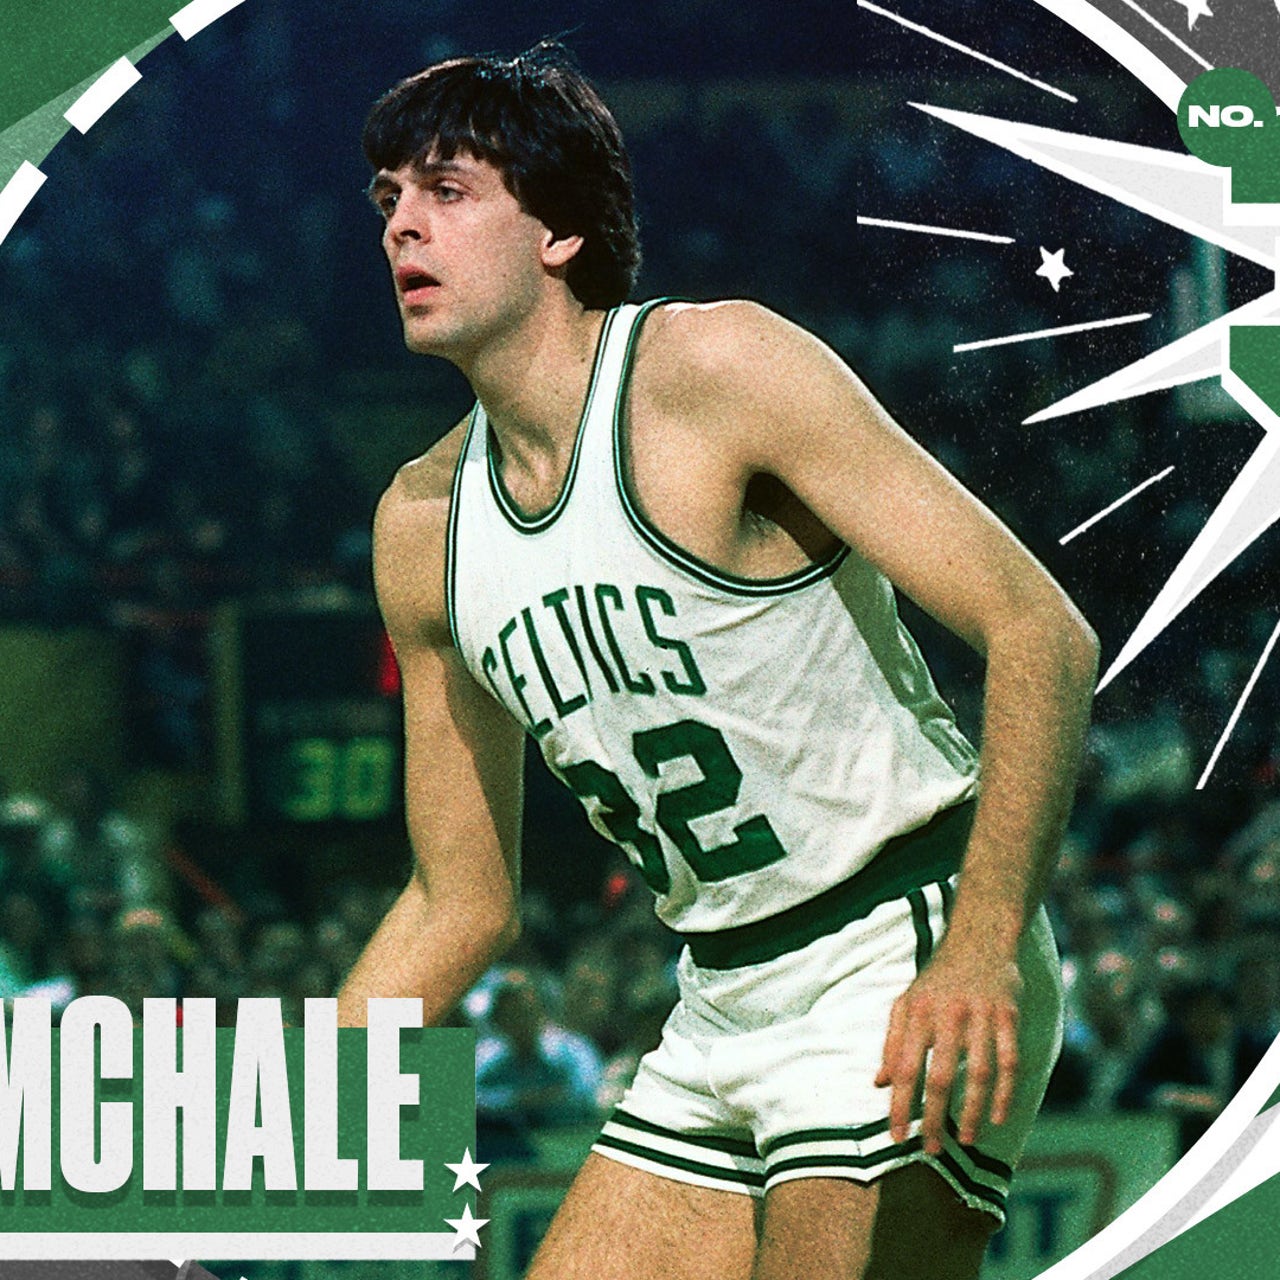 Top 50 NBA players from last 50 years: Kevin McHale ranks No. 34